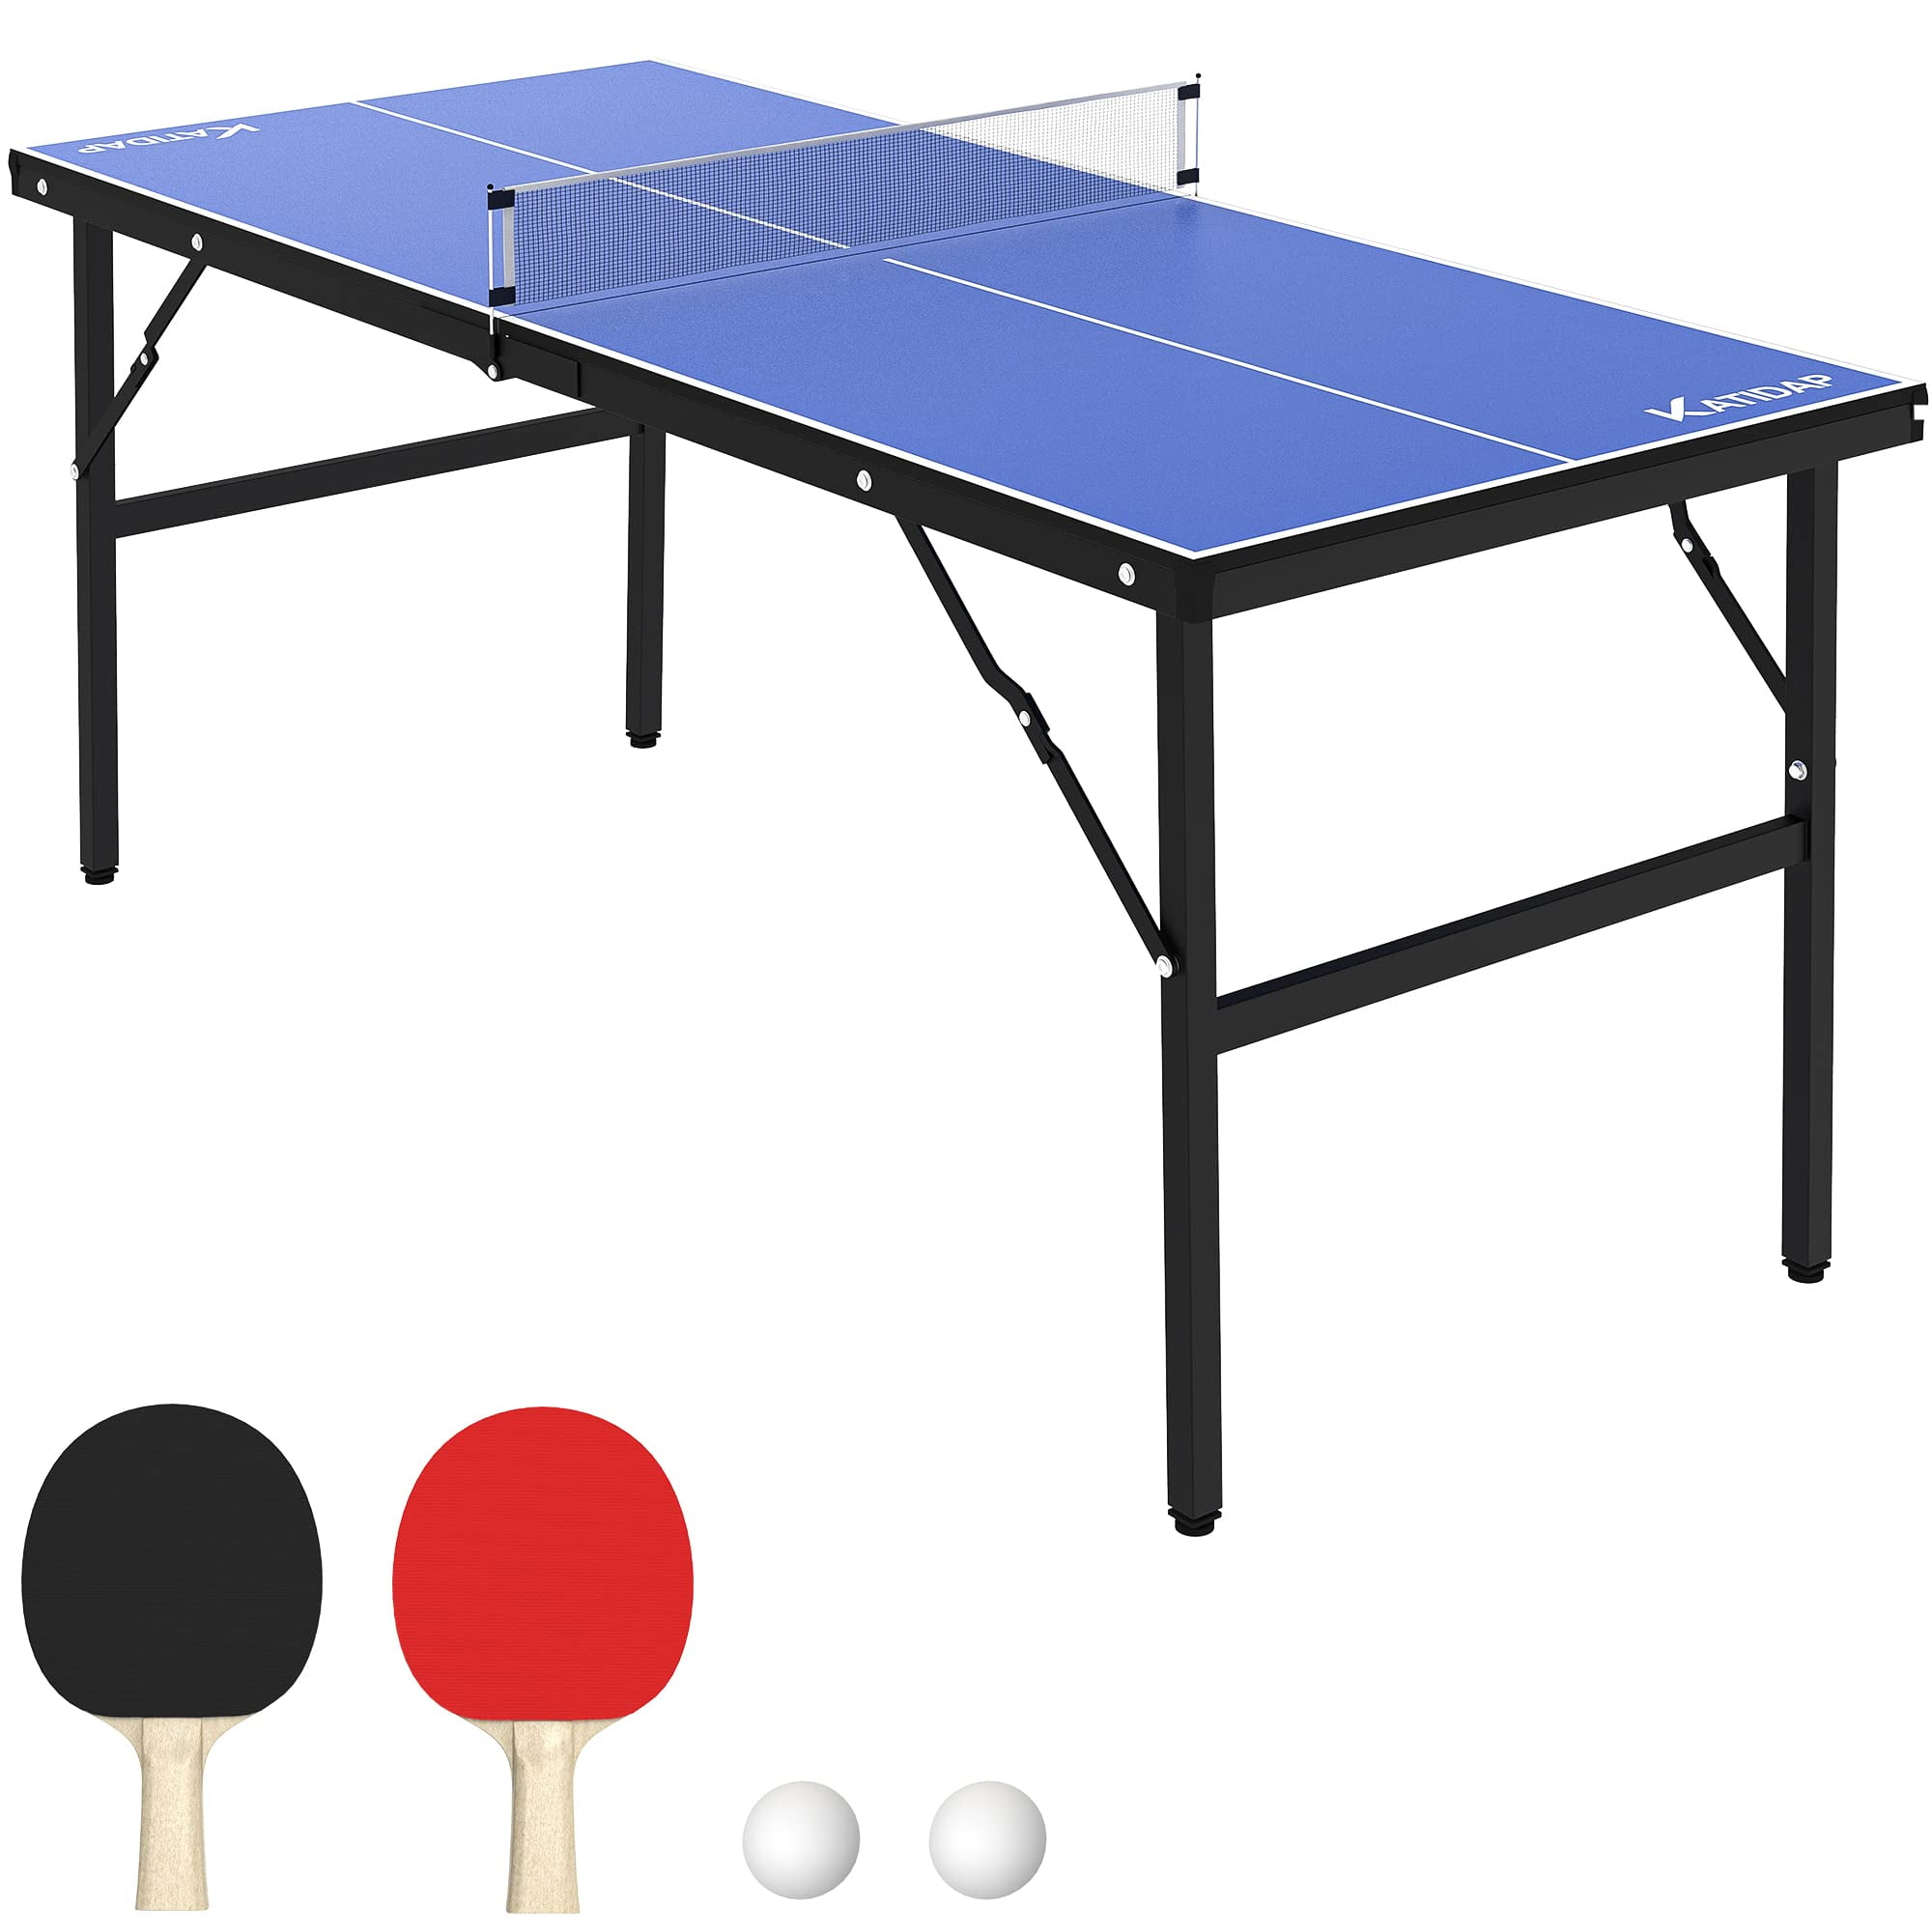 Folding Table Tennis Conversion Top Ping Pong Board Indoor Outdoor Kid Fun New 